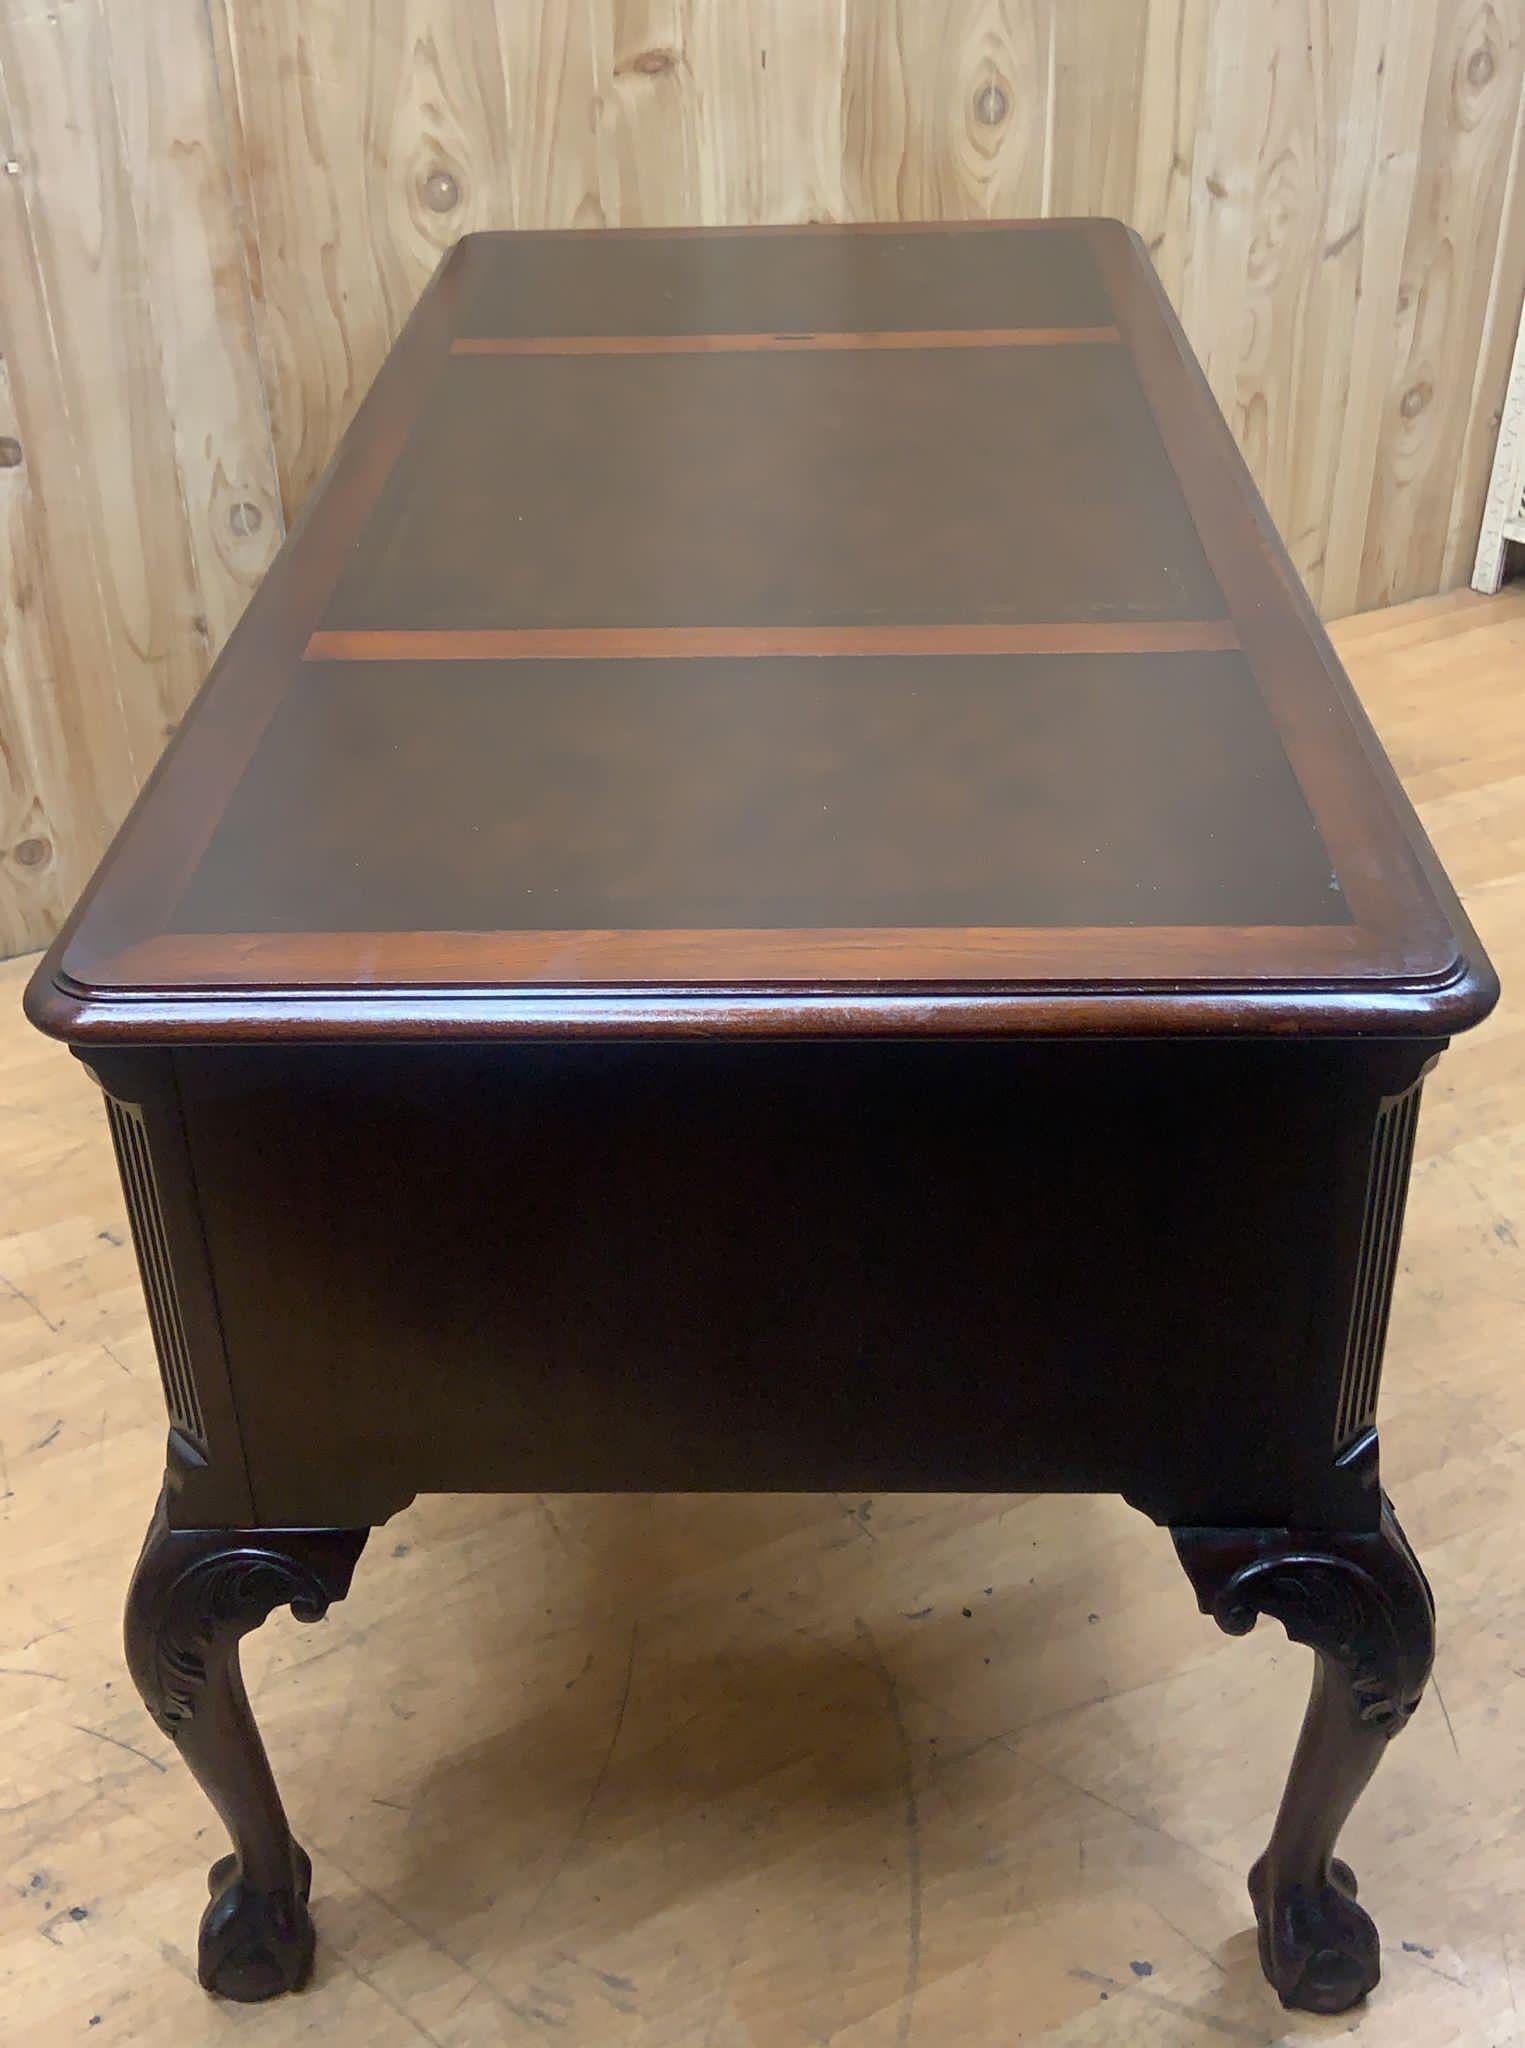 Vintage Heckman English Chippendale Tooled Leather Top Cabriole Leg Writing Desk For Sale 3